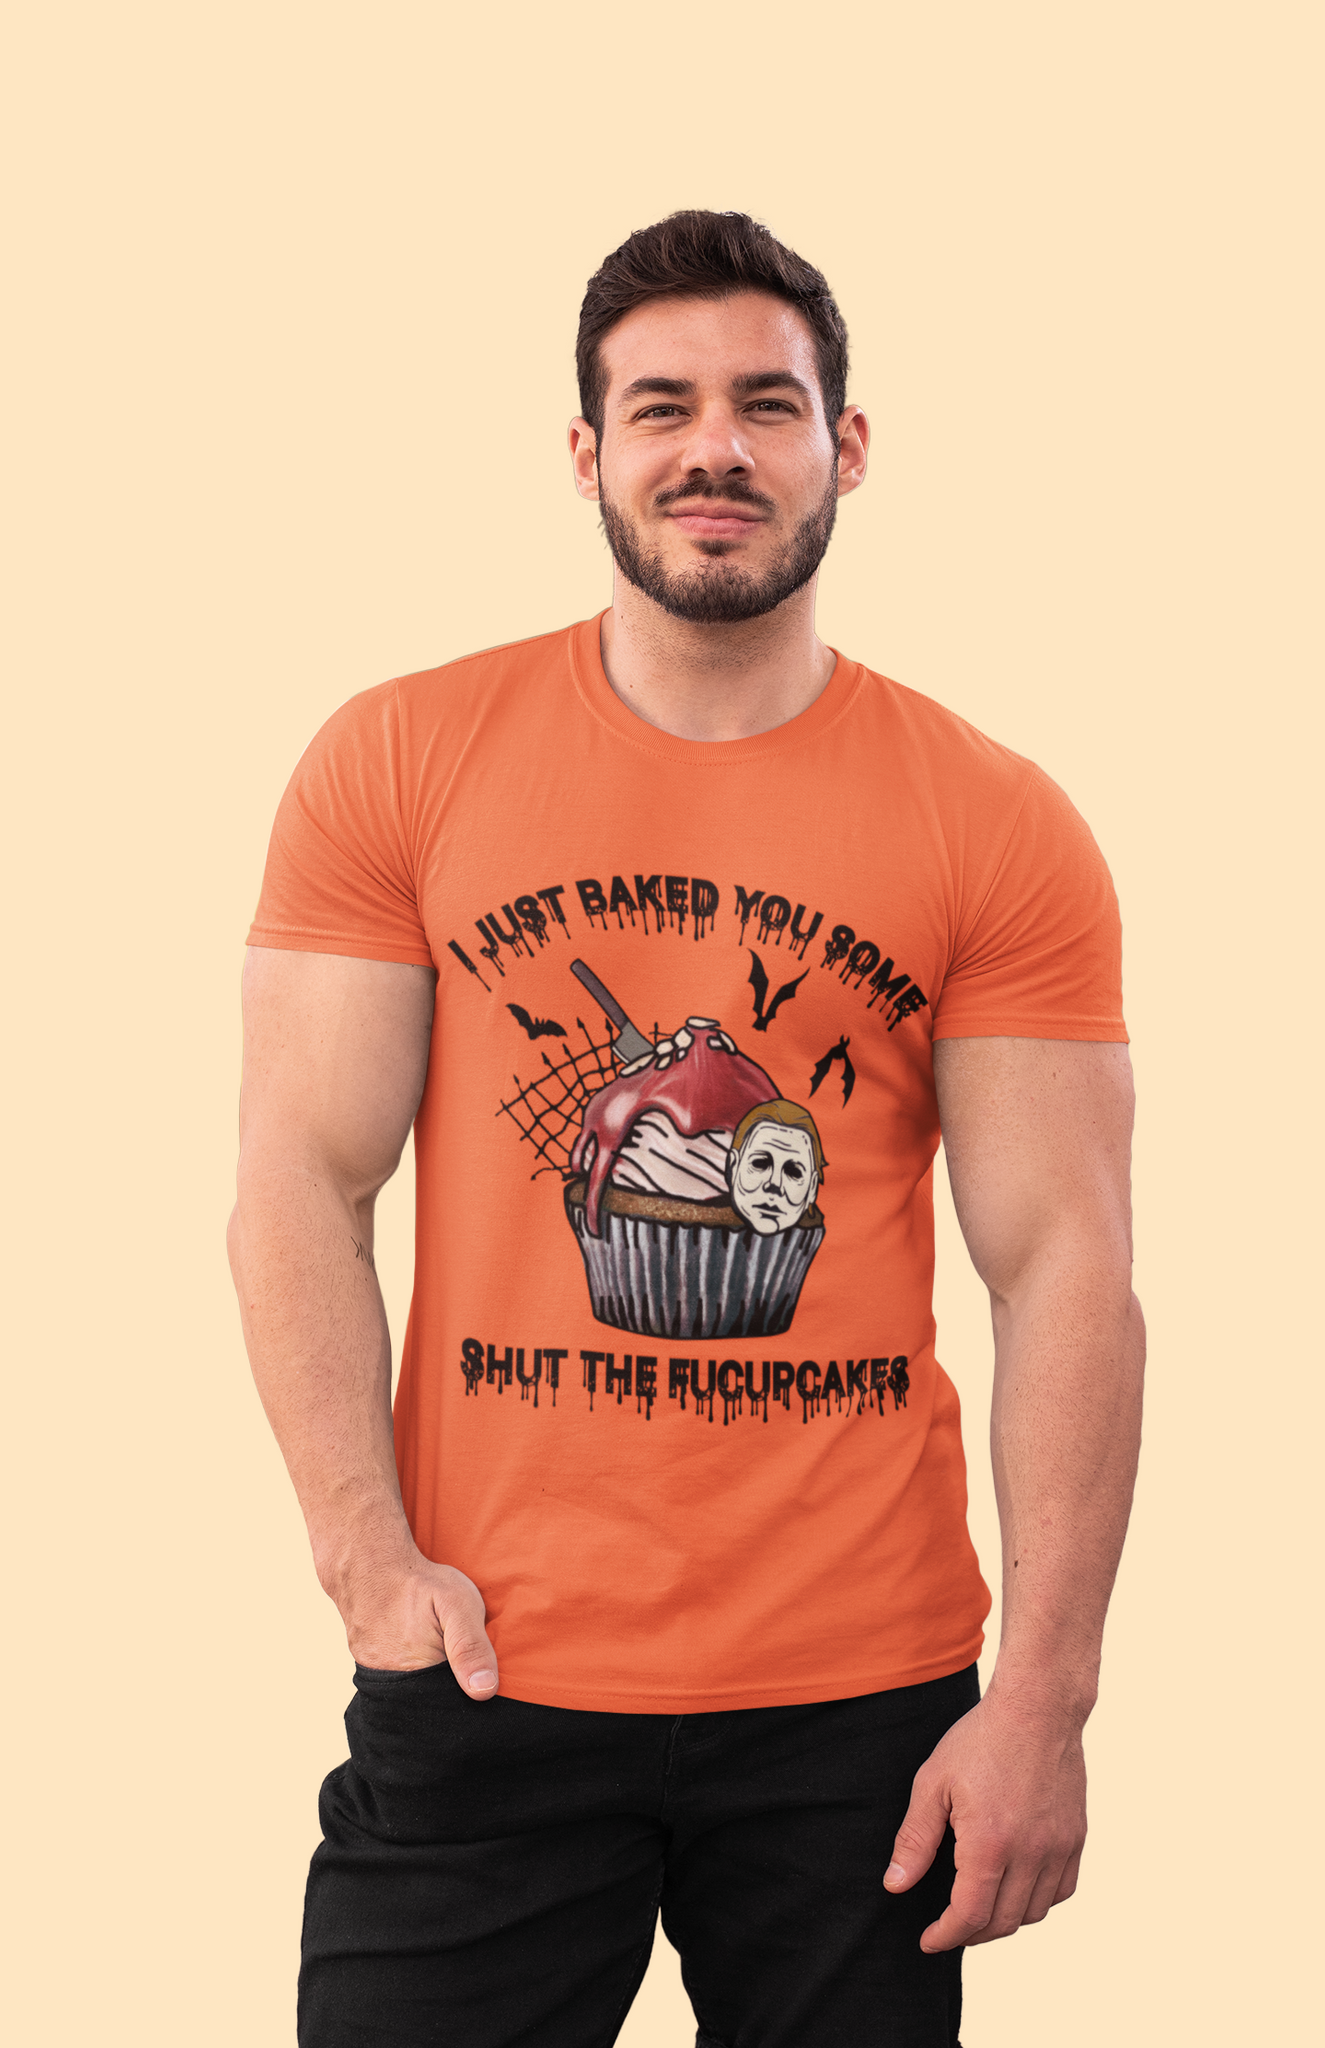 Halloween T Shirt, I Just Baked You Some Shut The Fucupcakes Tshirt, Michael Myers Cupcake T Shirt, Halloween Gifts